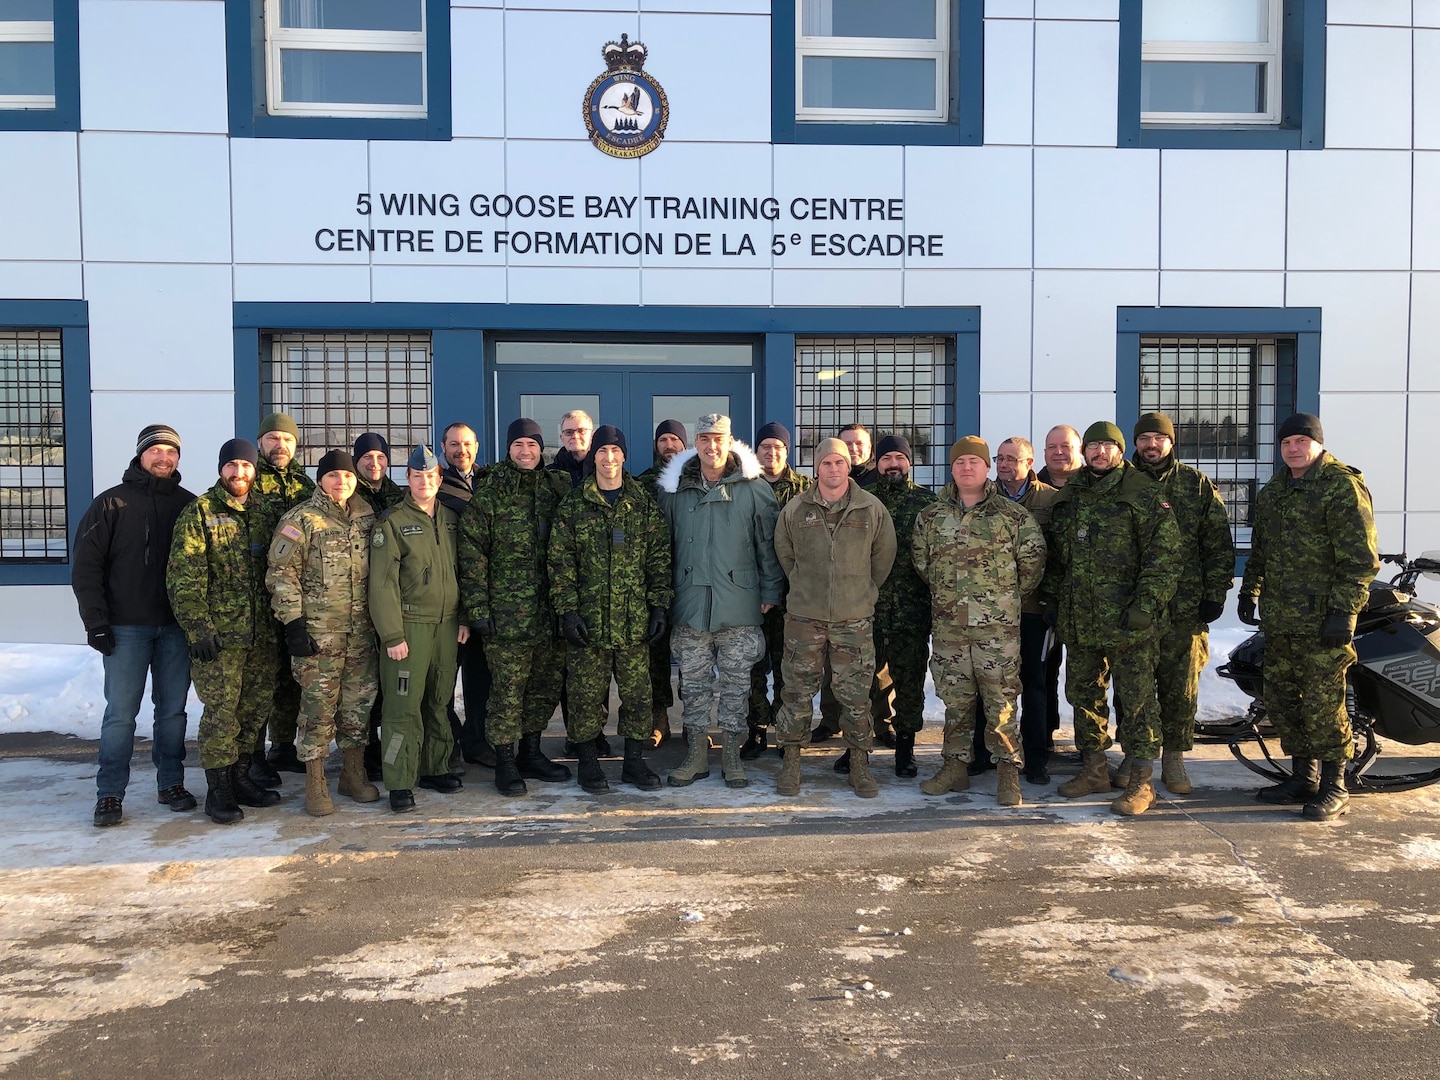 Members of the Arctic Air Power Seminar, (3rd edition), pose for a group photo at 5 Wing Goose Bay, Newfoundland and Labrador on January 21, 2020.